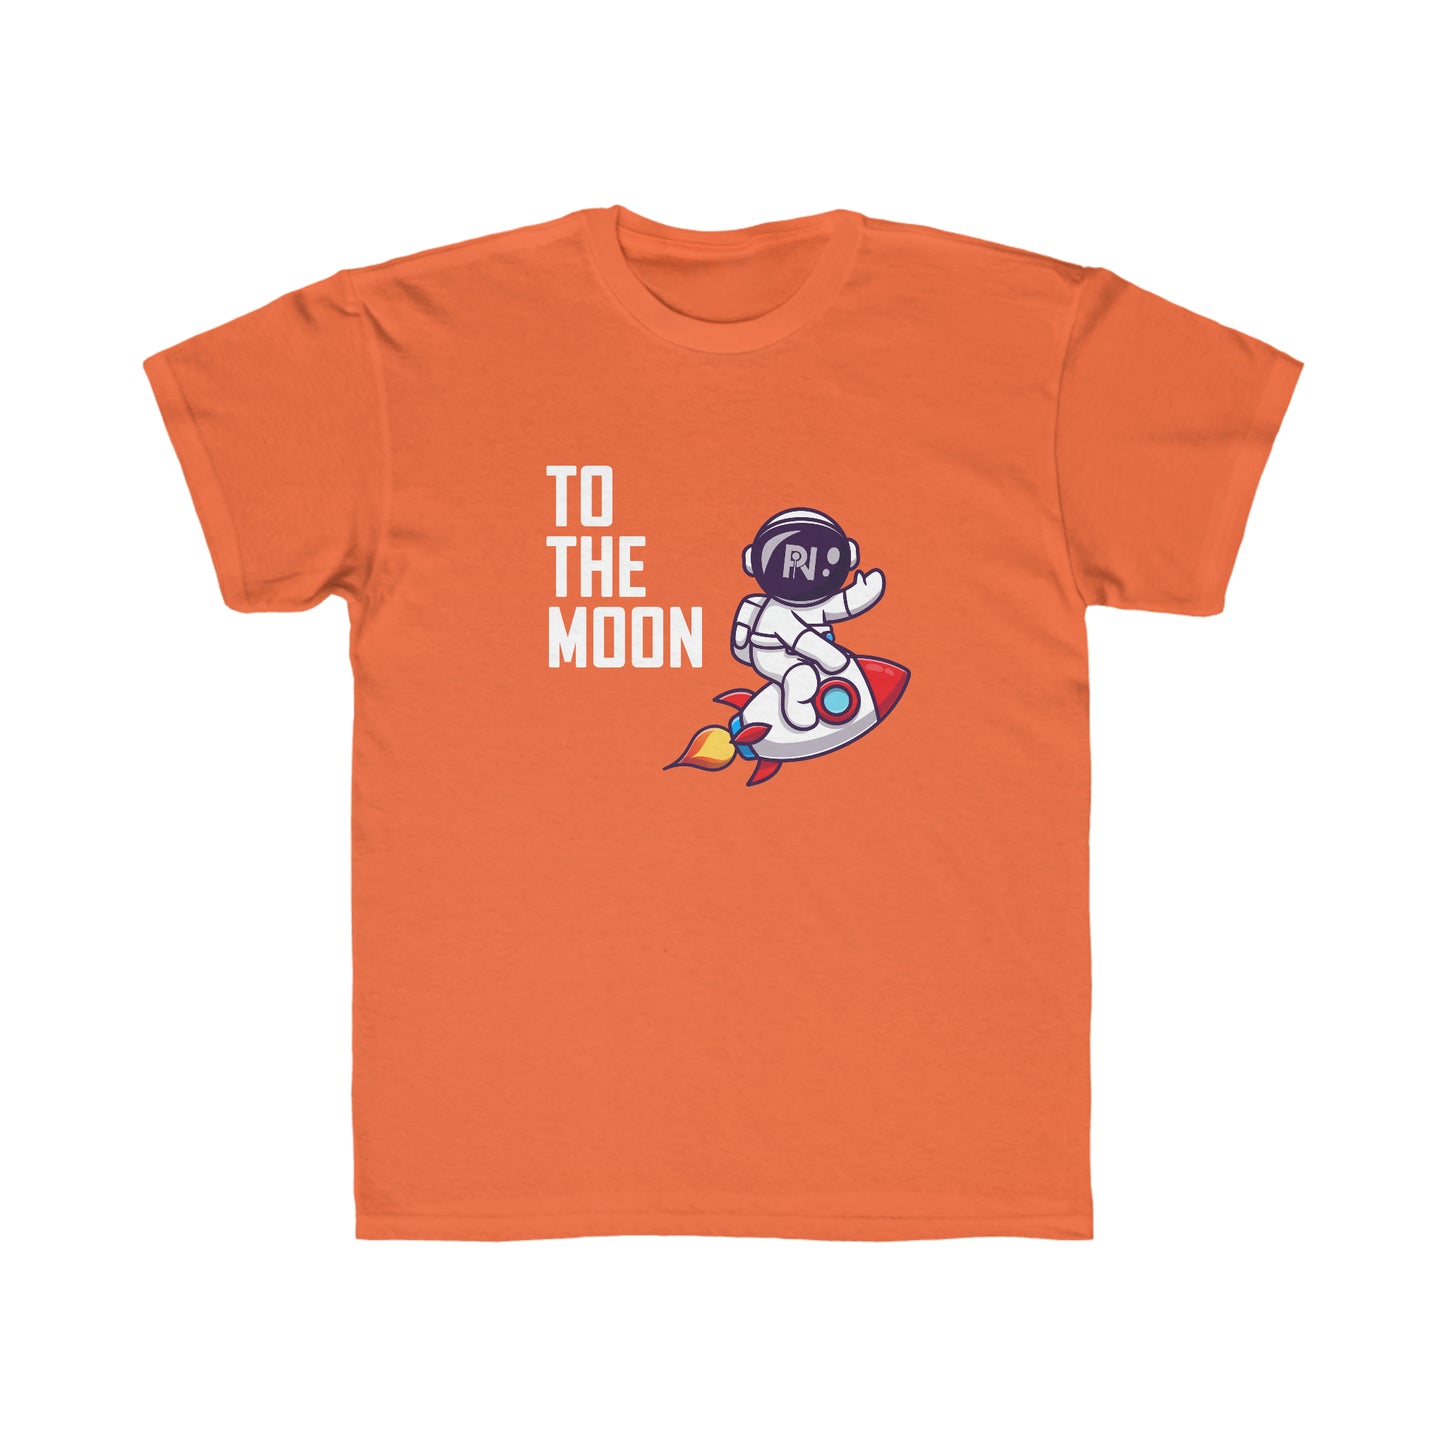 Kids Regular Fit Tee (To THE MOON.)